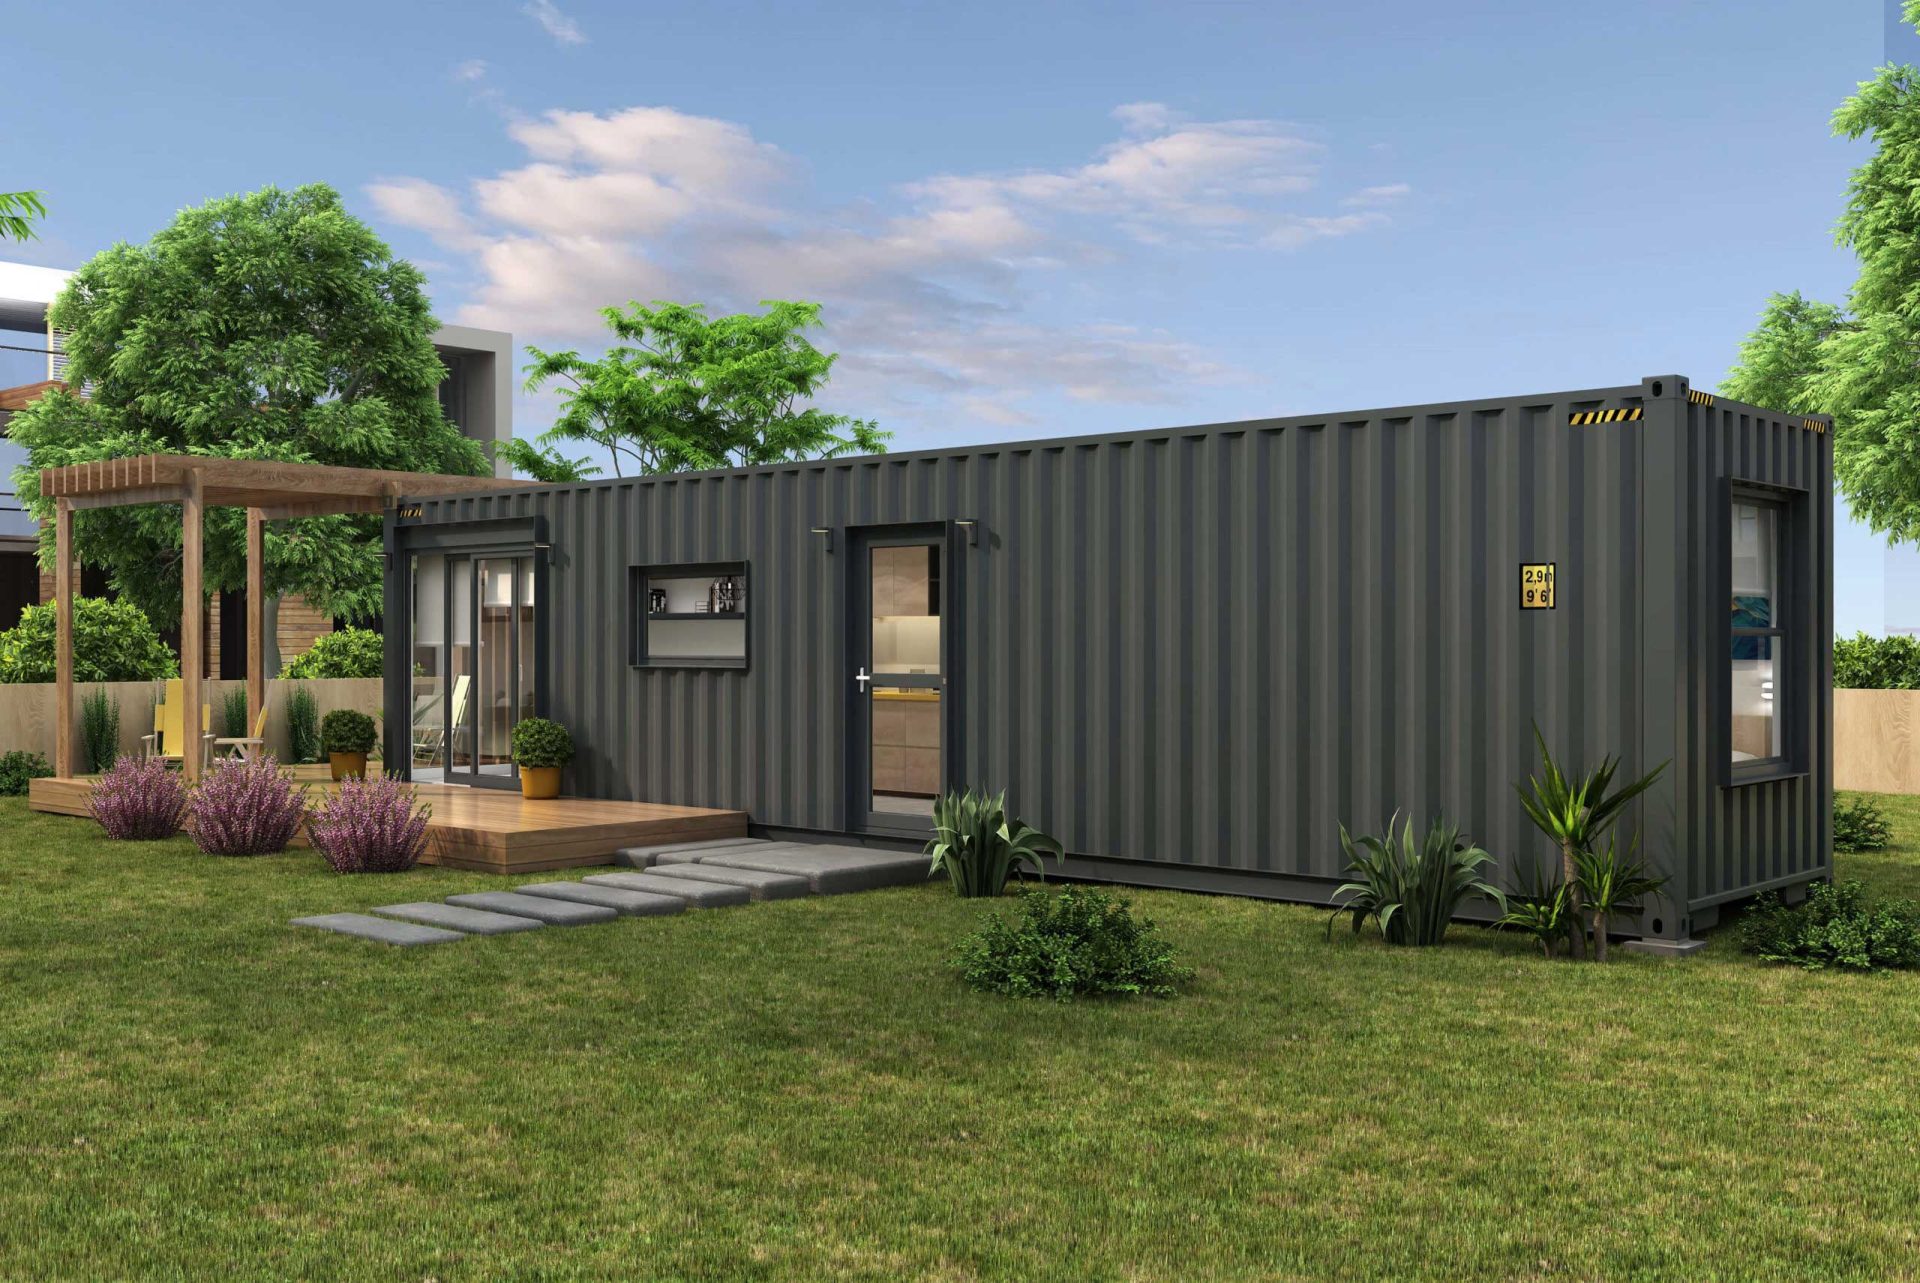 Diverse Uses for Shipping Container Homes